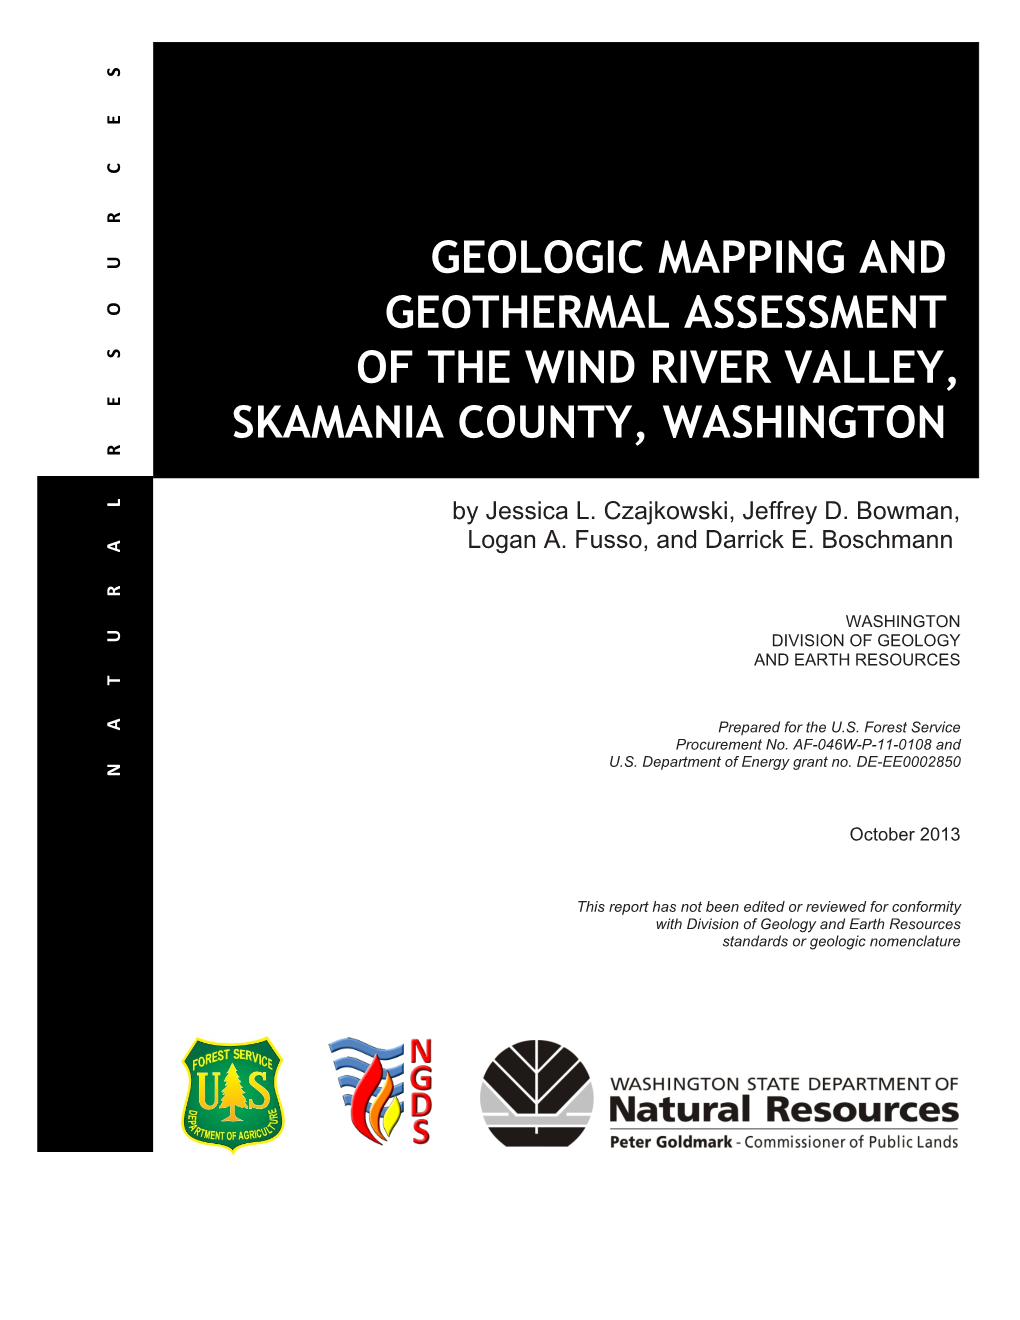 Geologic Mapping and Geothermal Assessment of the Wind River Valley, Skamania County, Washington